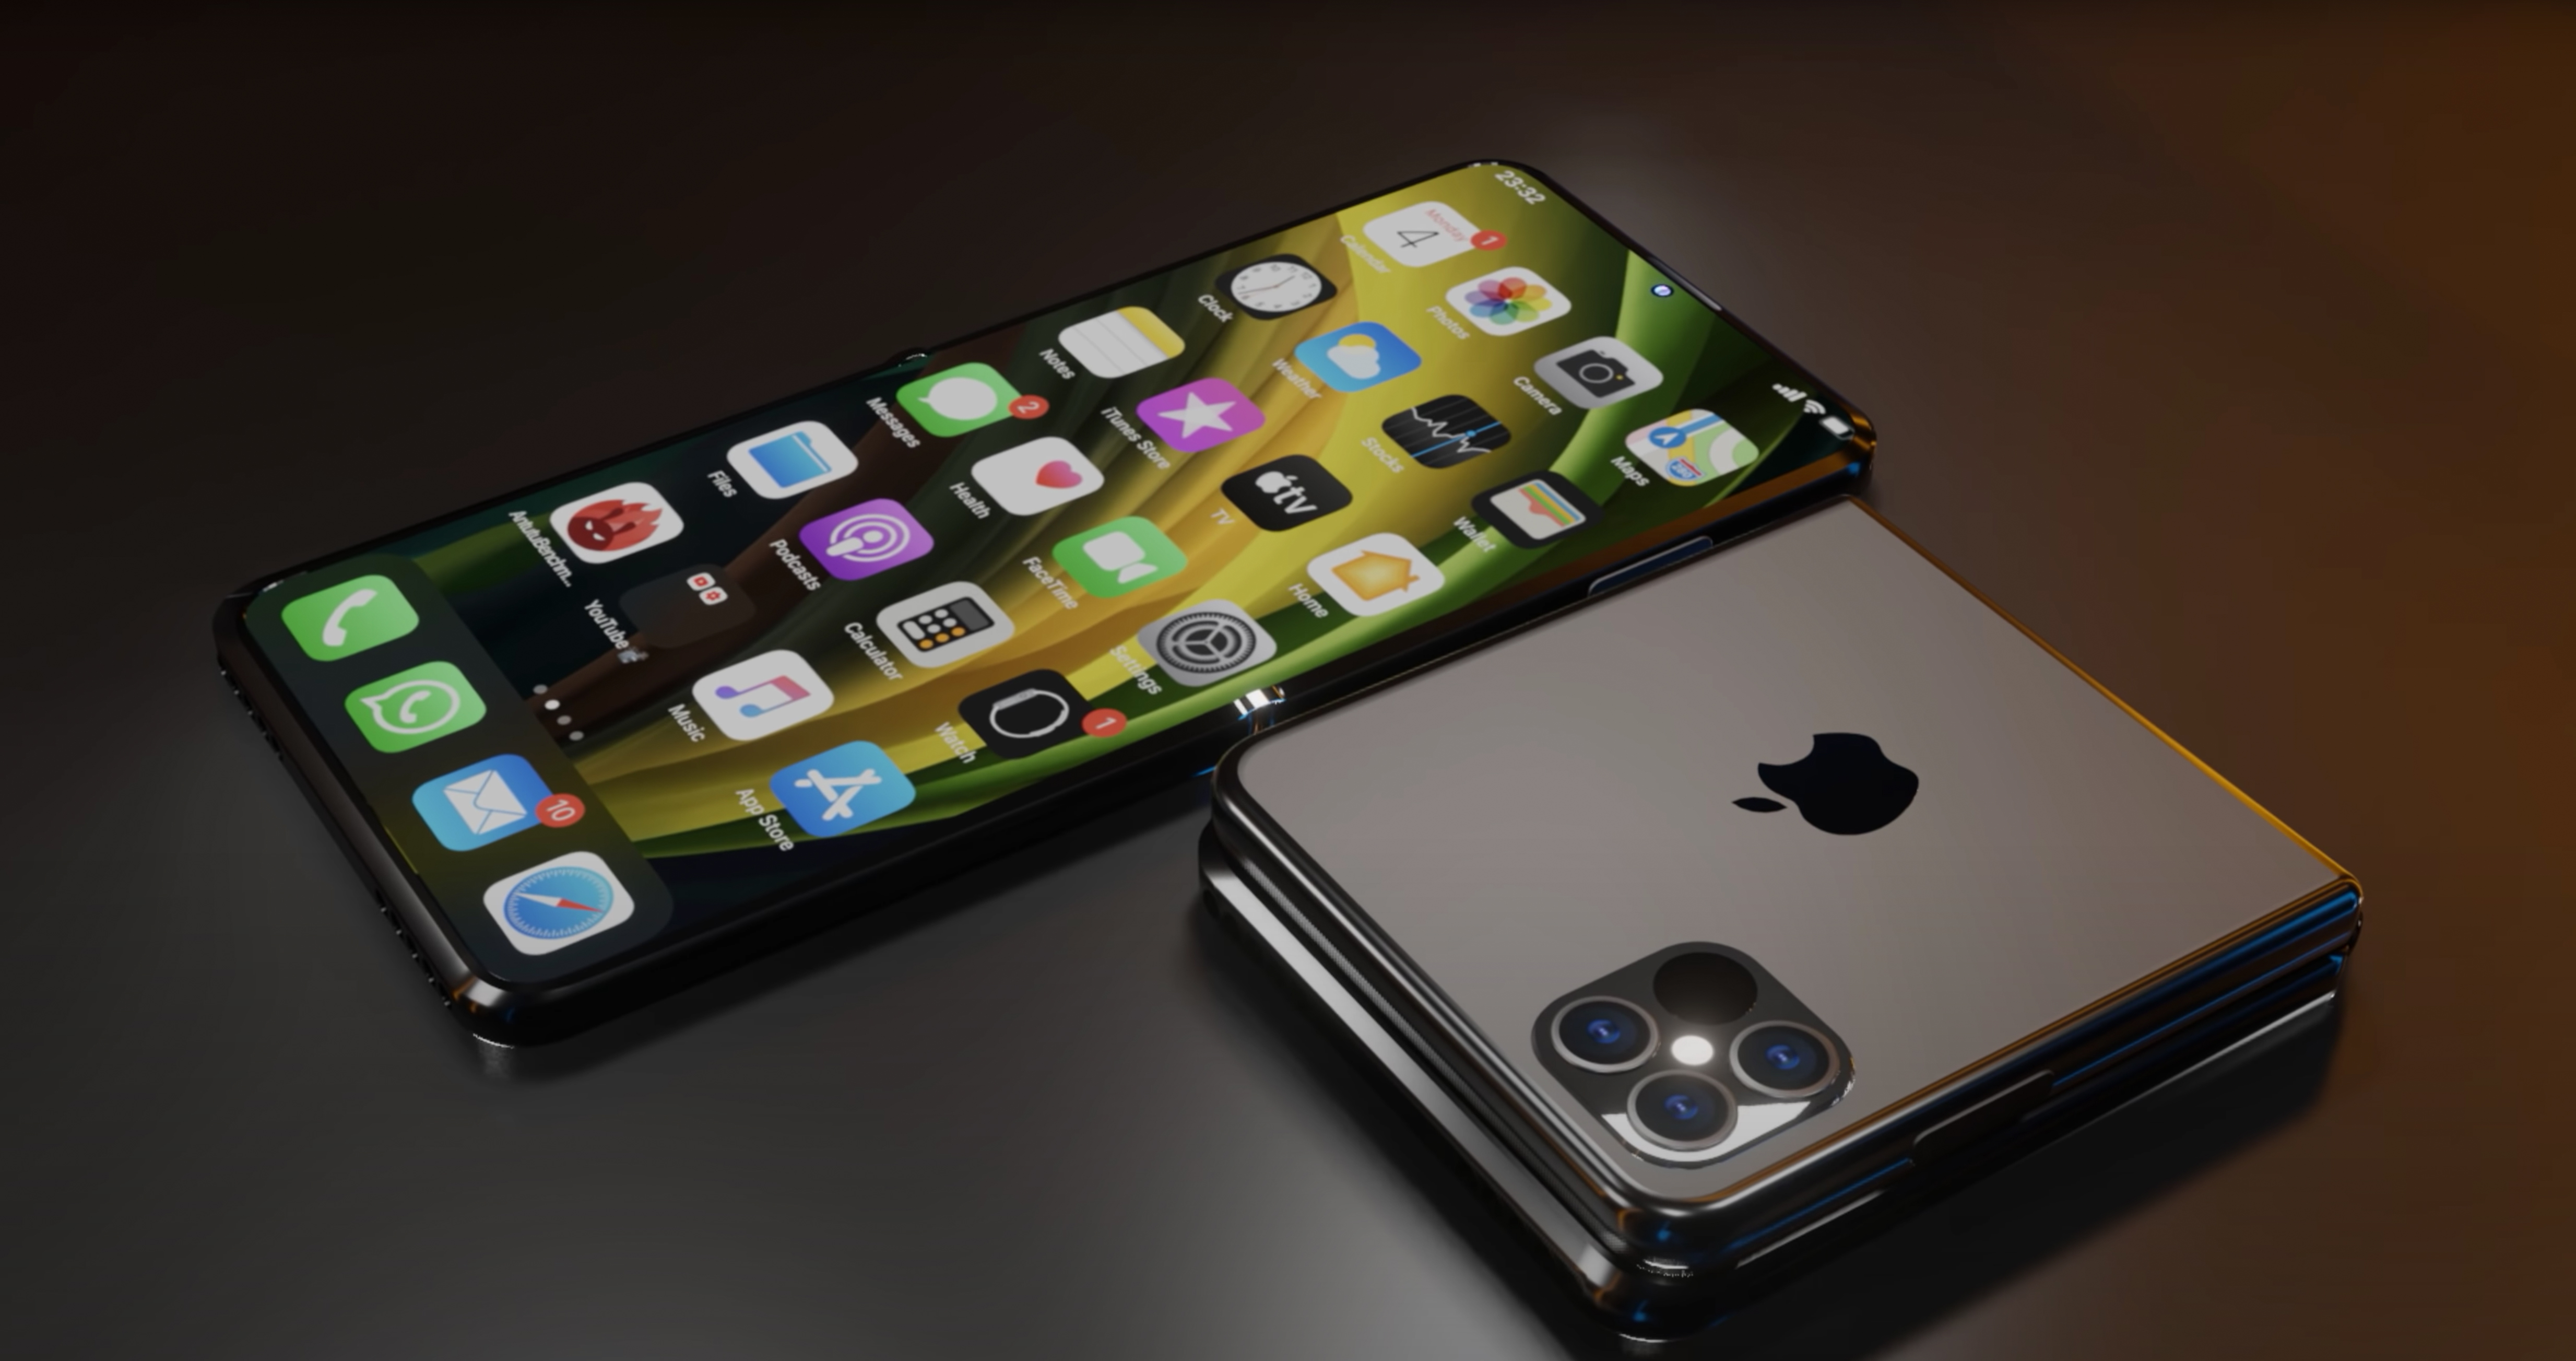 iPhone Flip: Everything we know about Apple's foldable phone plans ...